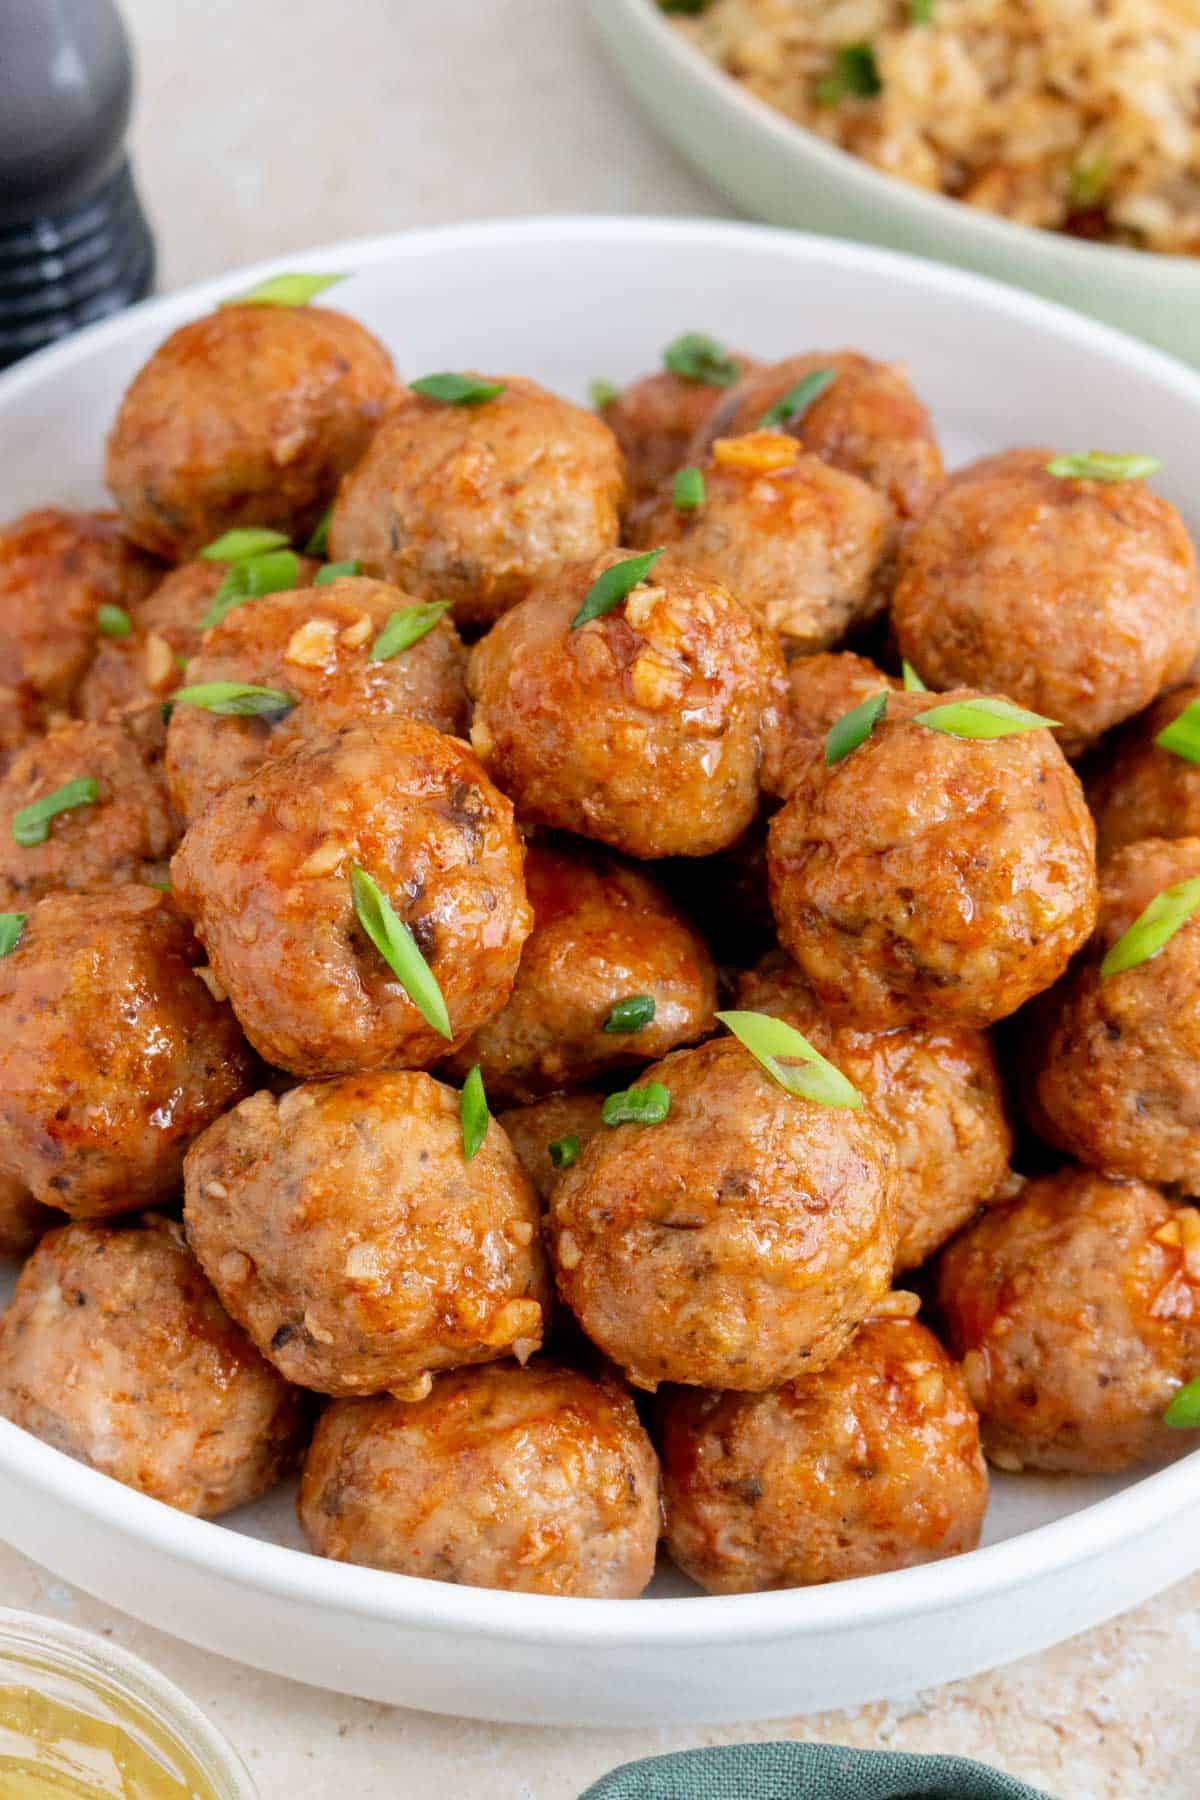 A close up view of honey sriracha meatballs on a plate.